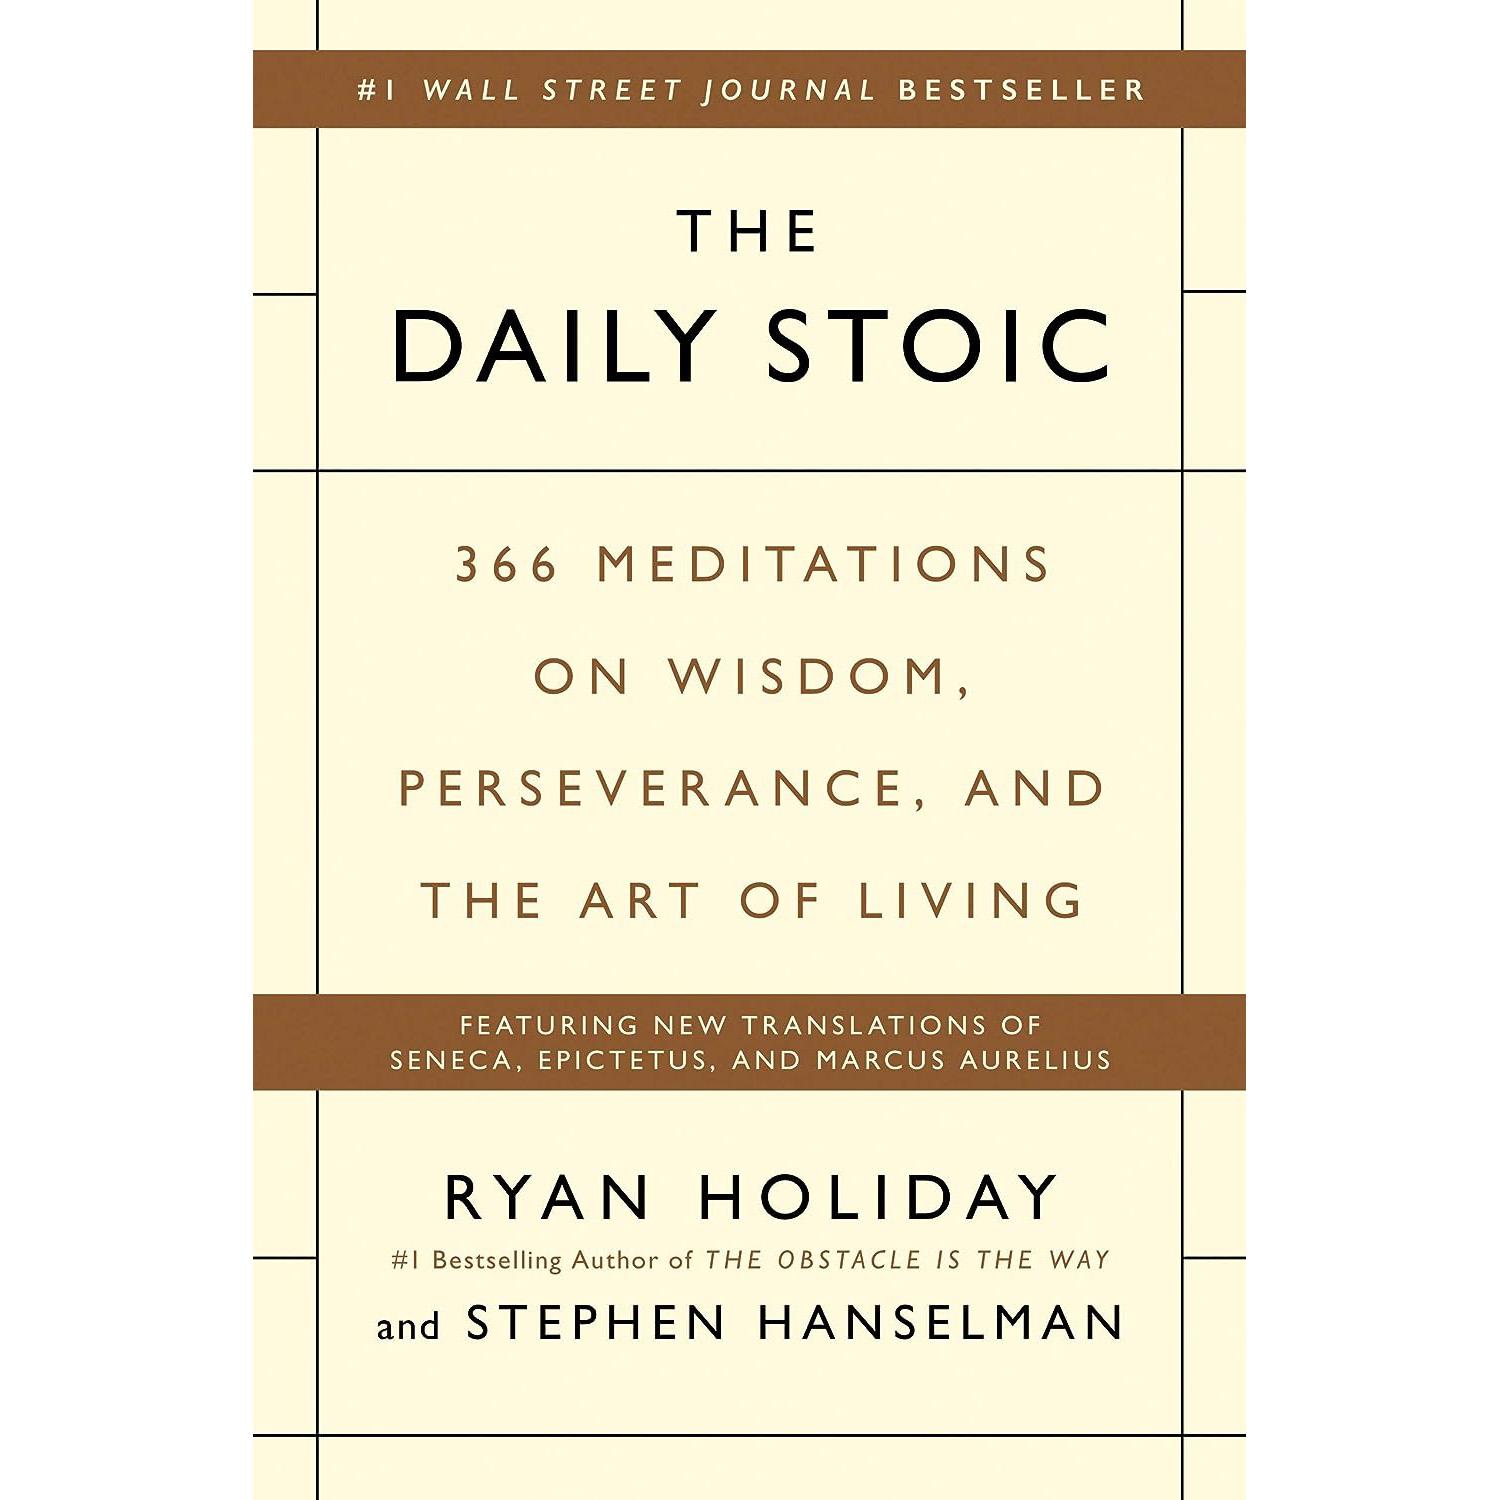 The Daily Stoic 366 Meditations Art of Living eBook for $1.99